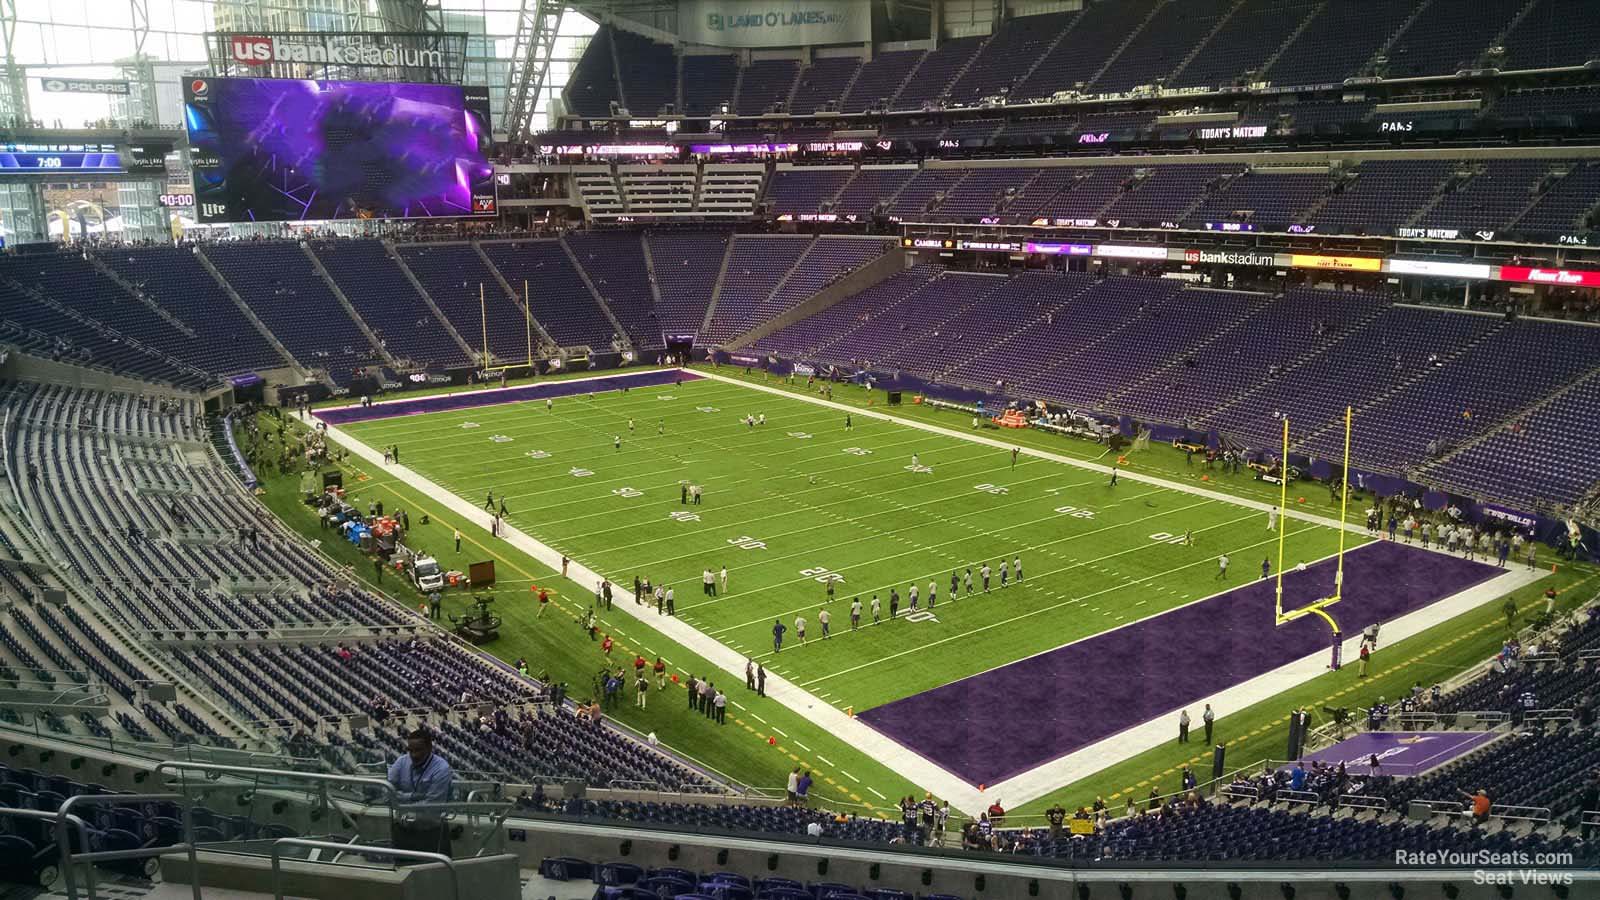 section 226, row 12 seat view  for football - u.s. bank stadium